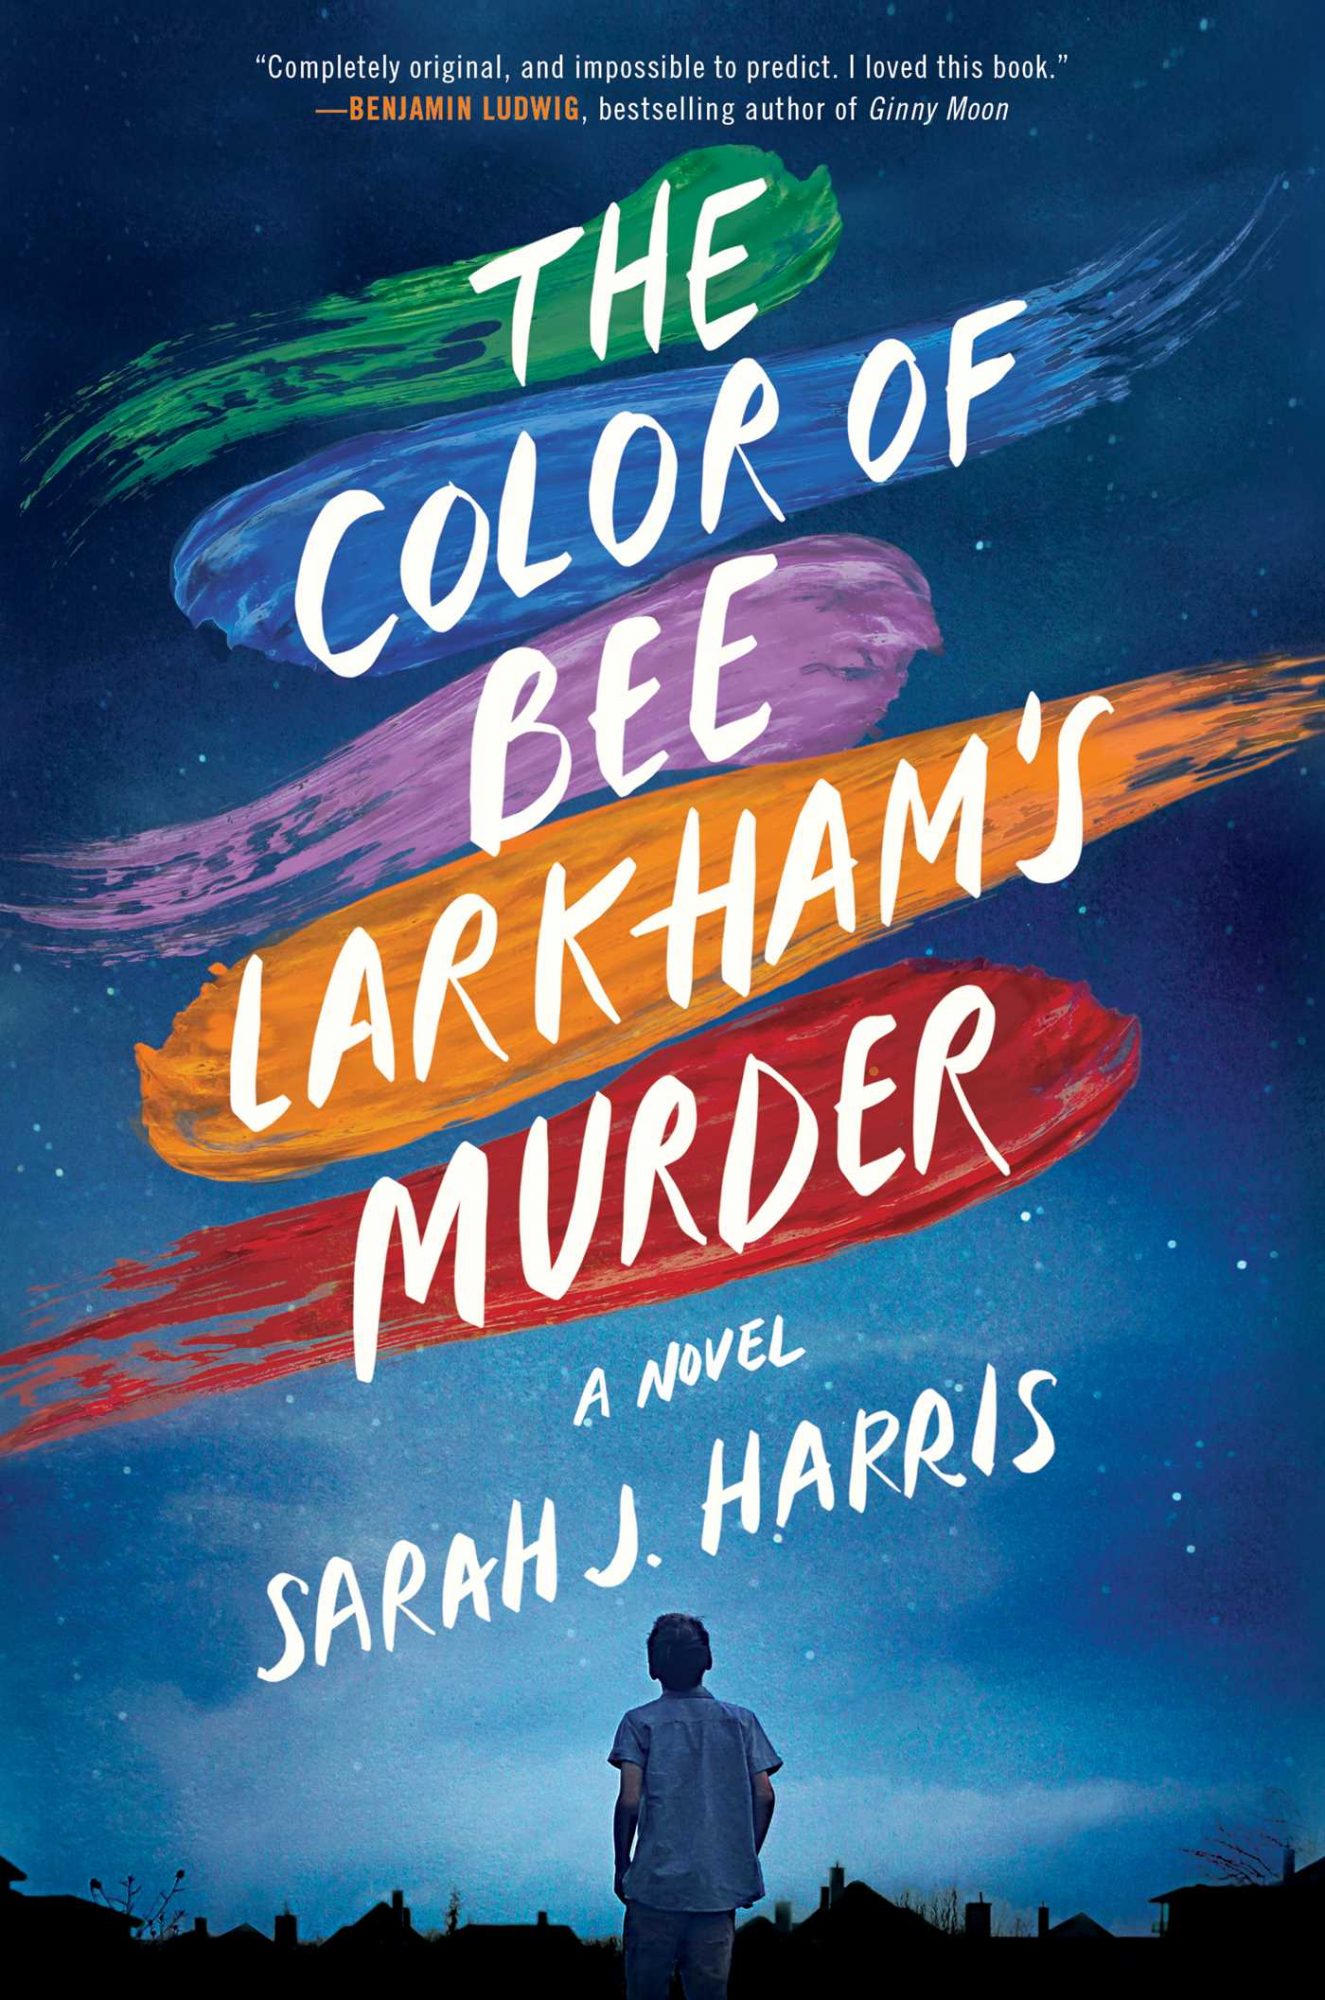 picture-of-the-color-of-bee-larkhams-murder-book-photo.jpg